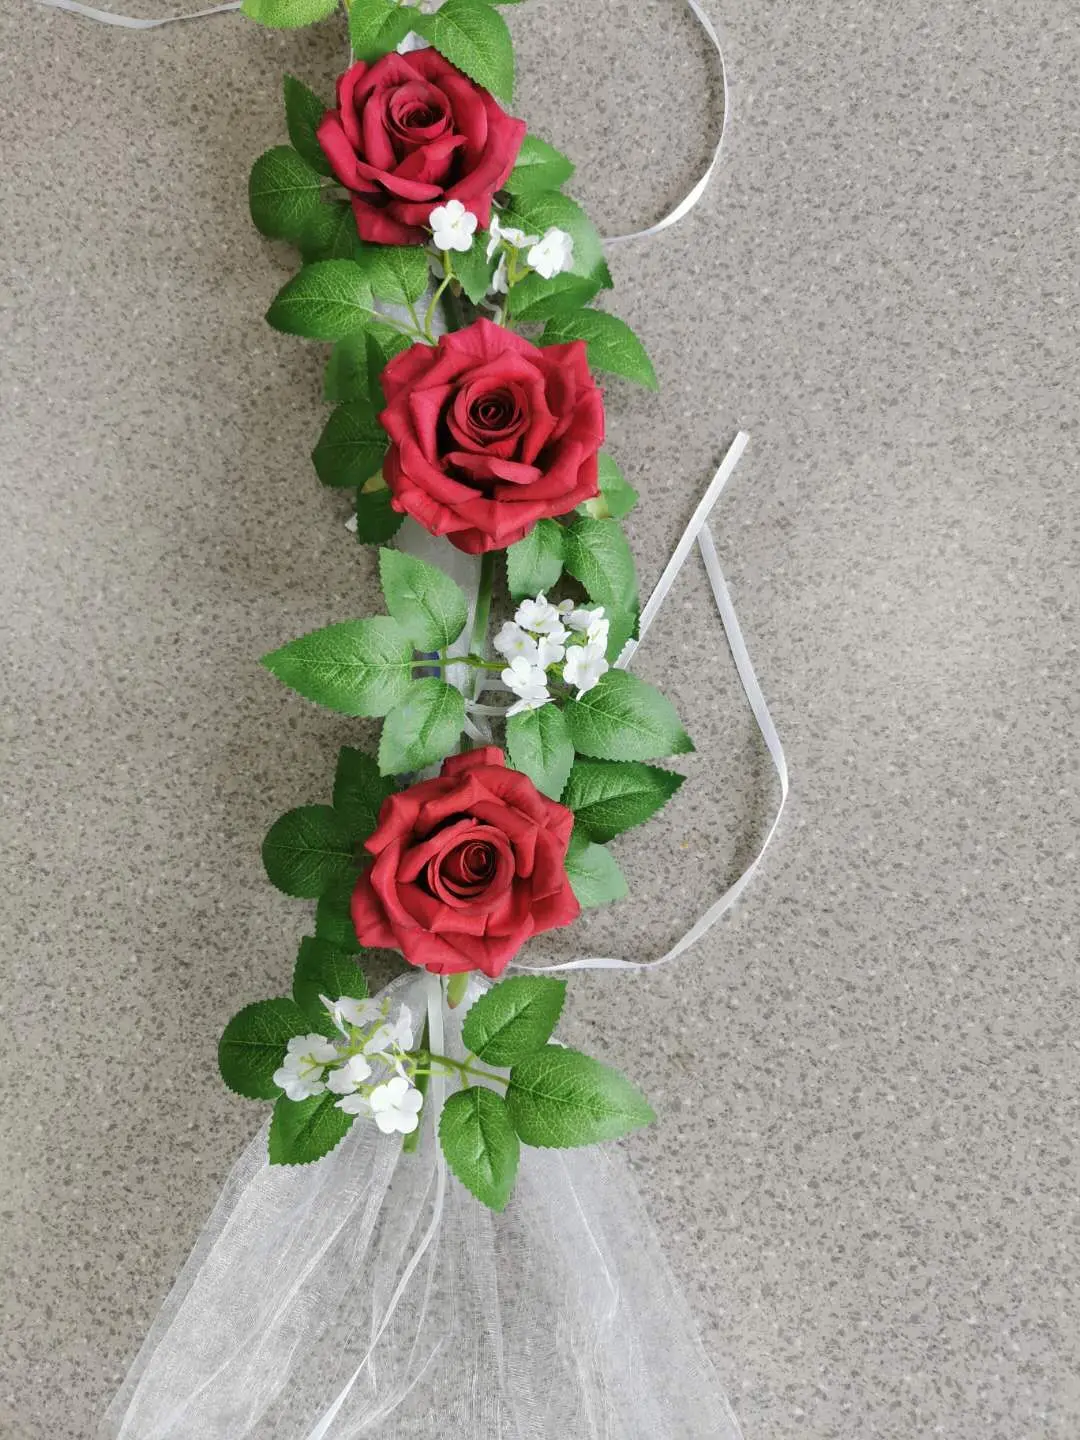 Yannew Artificial White Rose with Gauze for Wedding Car Decoration Kit  Flower Red Auto Front Flower Garland Romantic Wed Decor